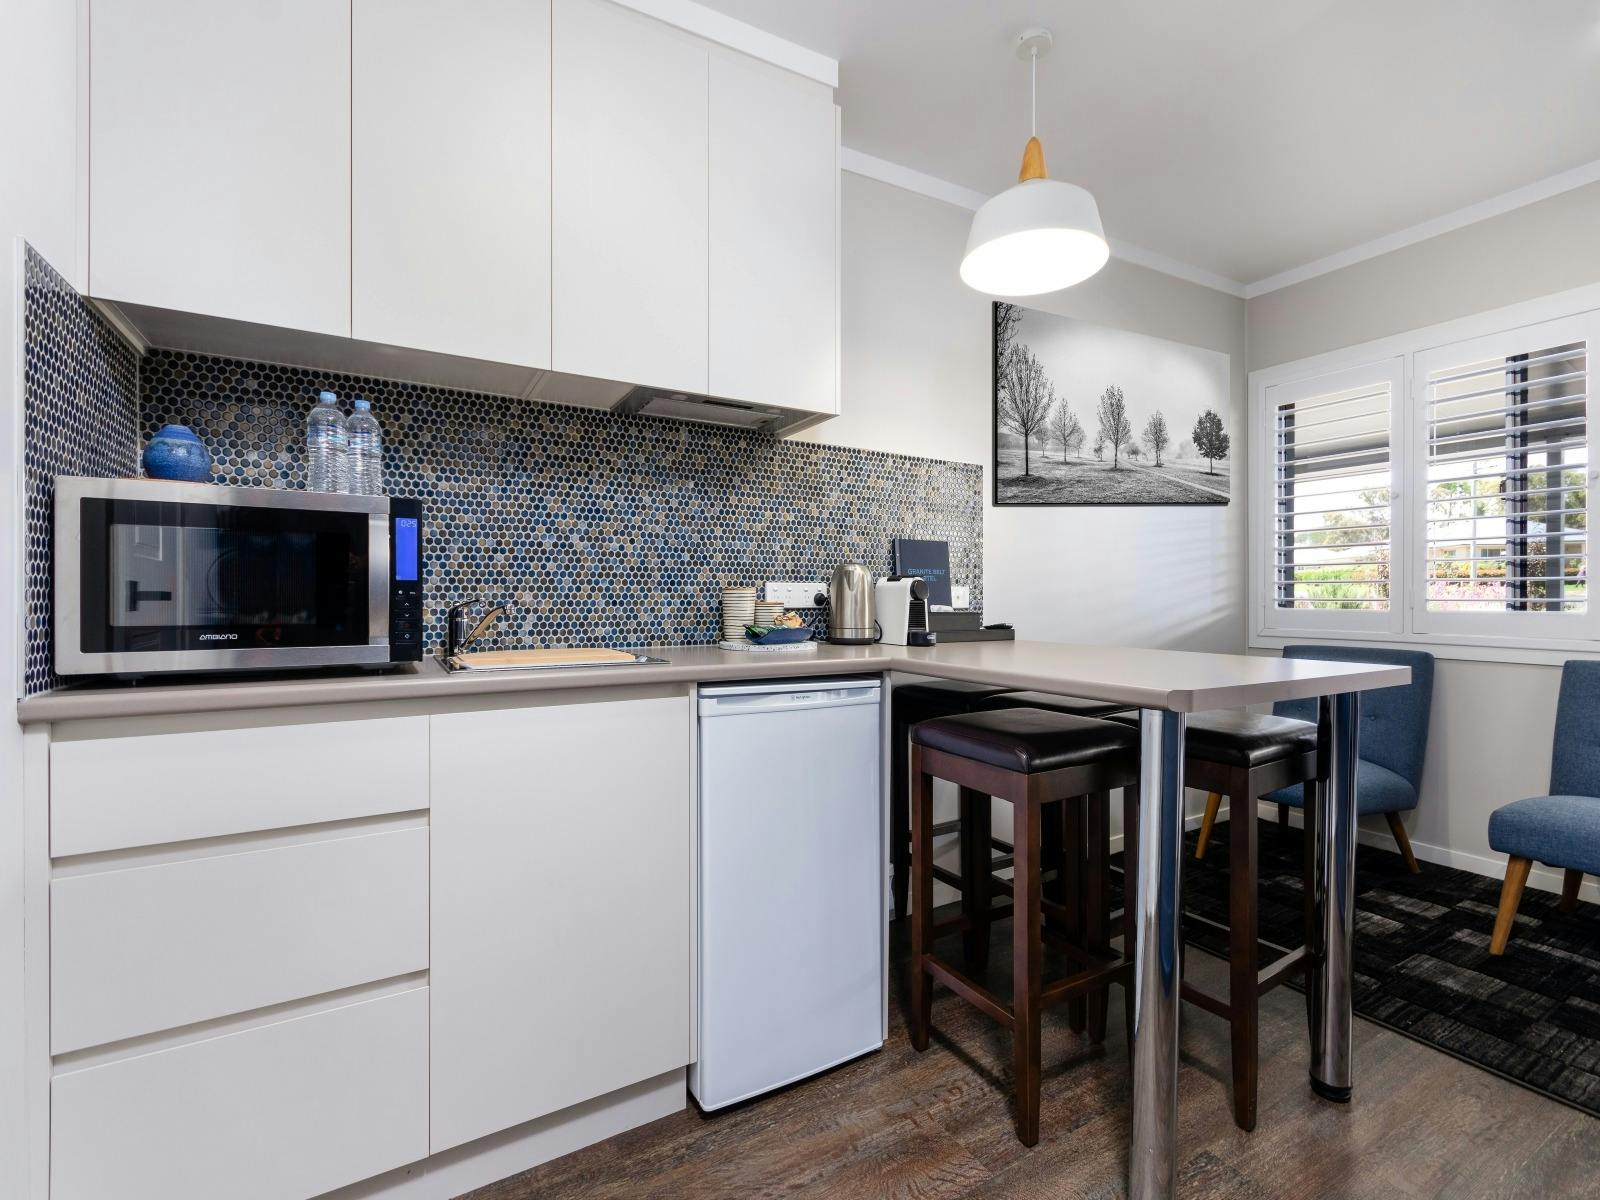 Kitchenette in our Deluxe 2 bedroom unit, complete with Nespresso coffee machine